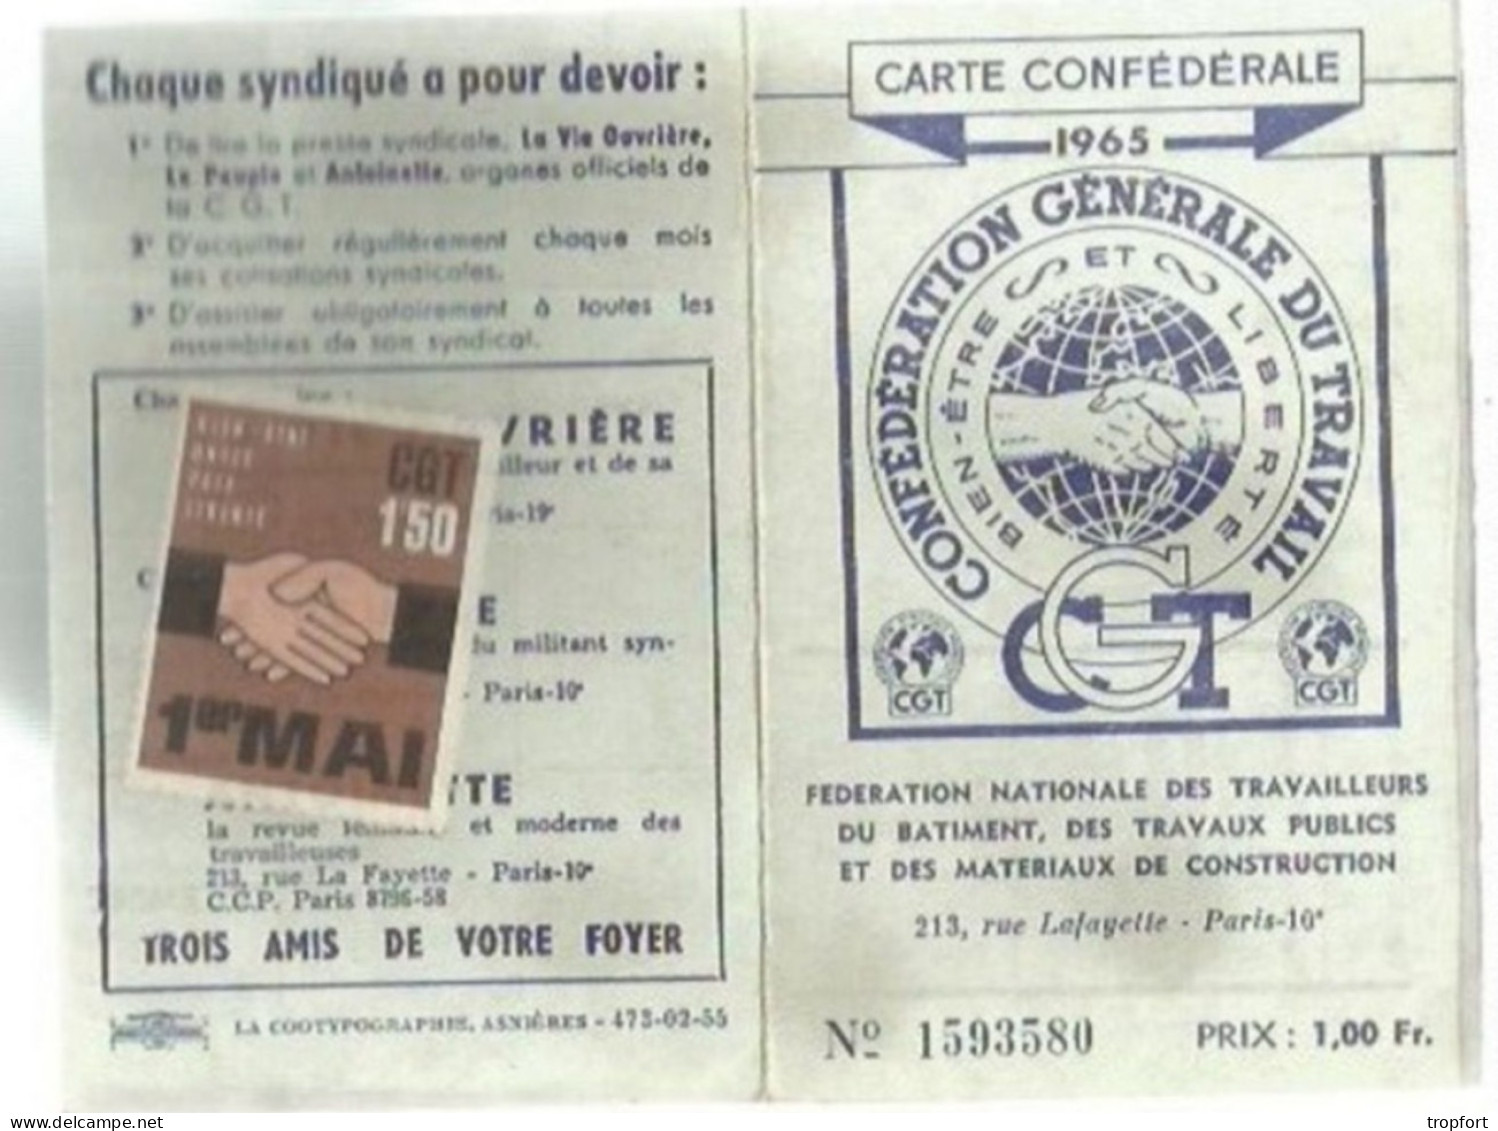 PG / CARTE 1965 SYNDICALE CGT  Avec Ses Timbres Adhèrent  SYNDICAT C.G.T TIMBRE TAMPON CACHET - Membership Cards